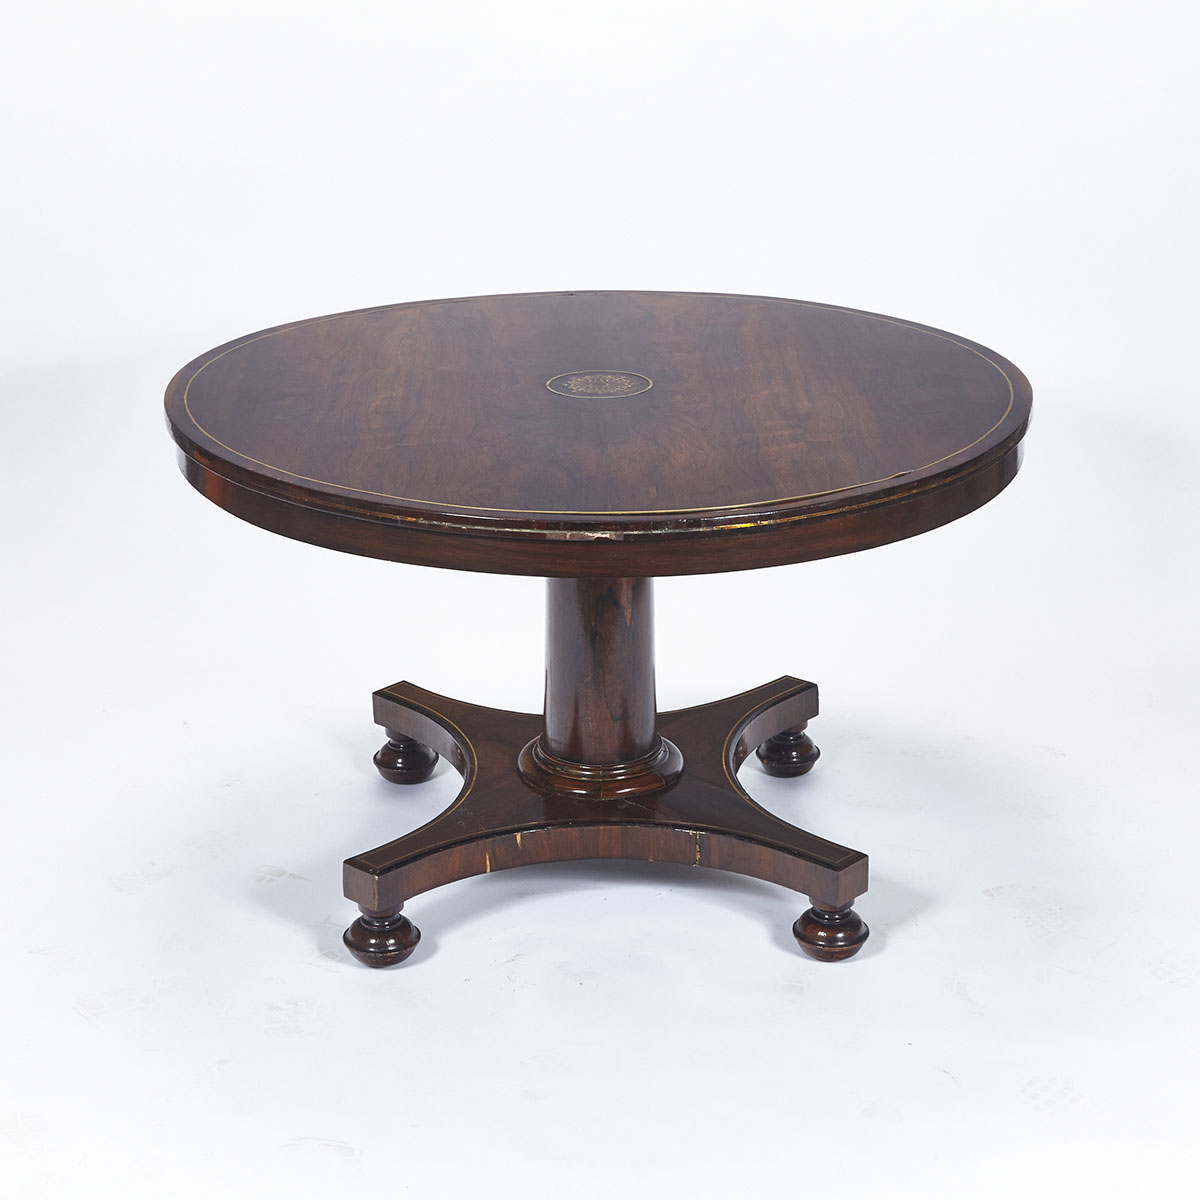 French Empire Style Brass Strung Rosewood Table, early 20th century